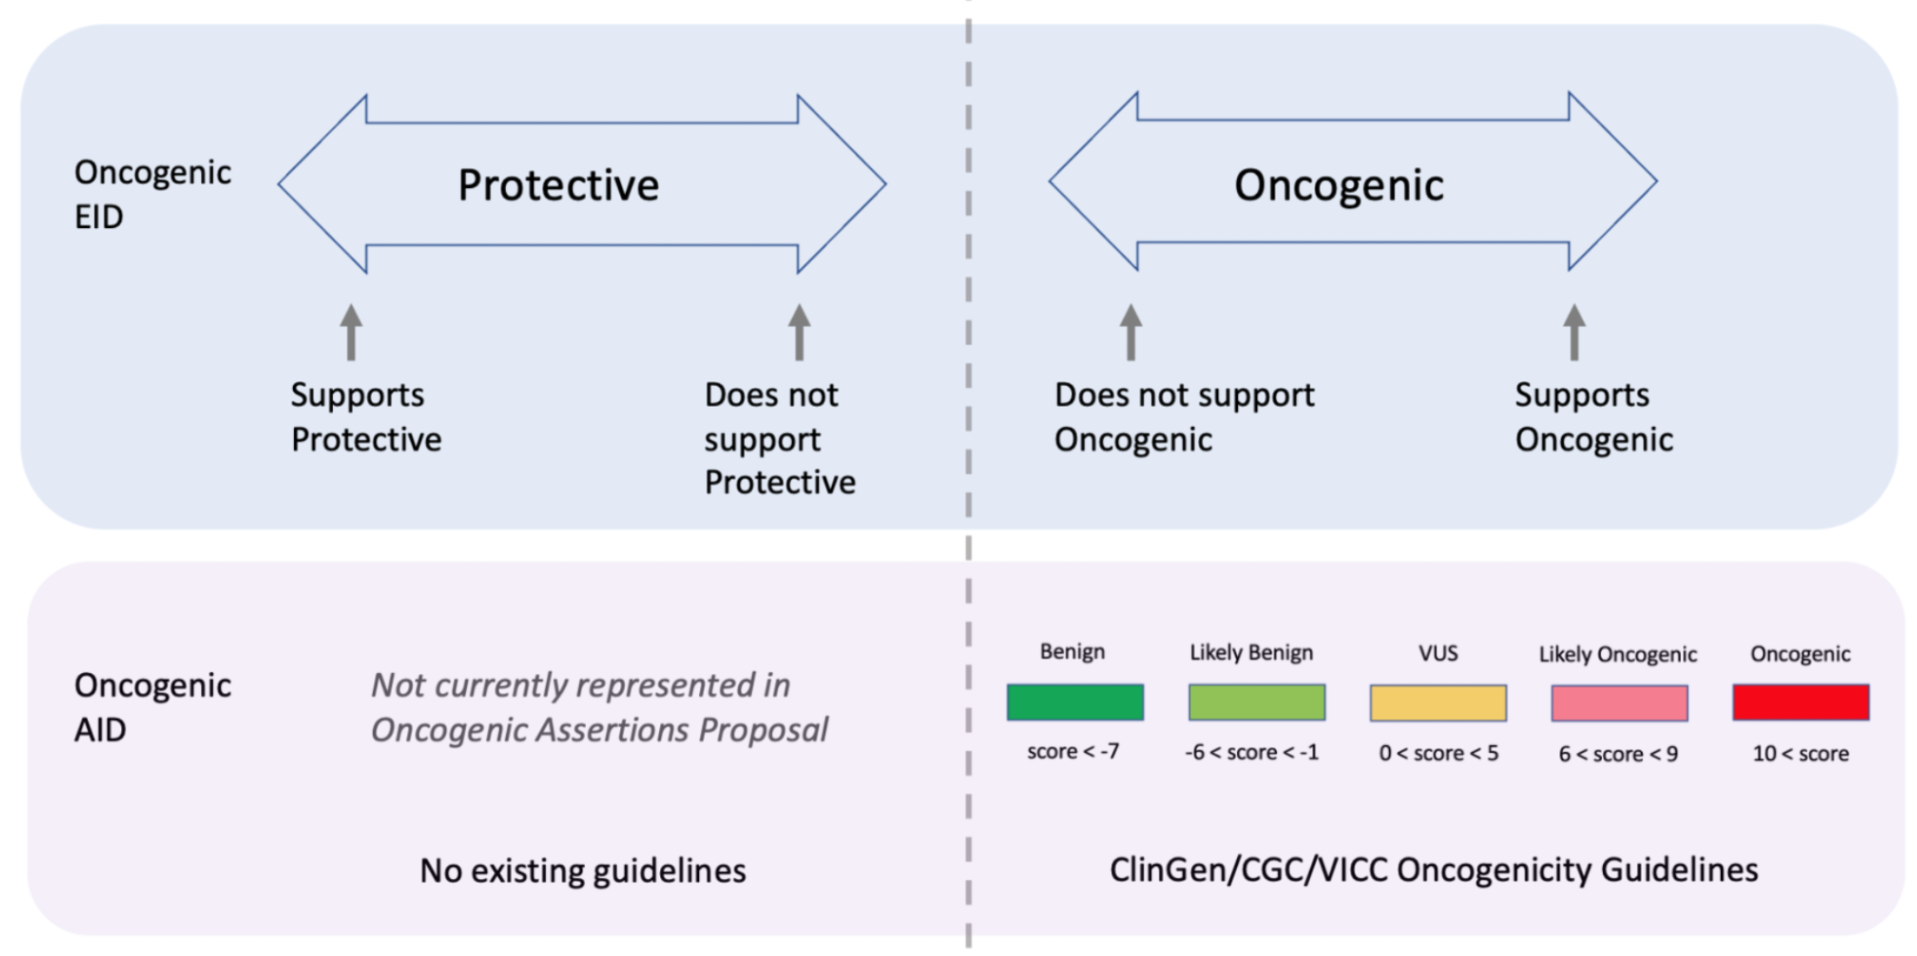 Oncogenic Evidence in contrast to the Oncogenic Assertion.